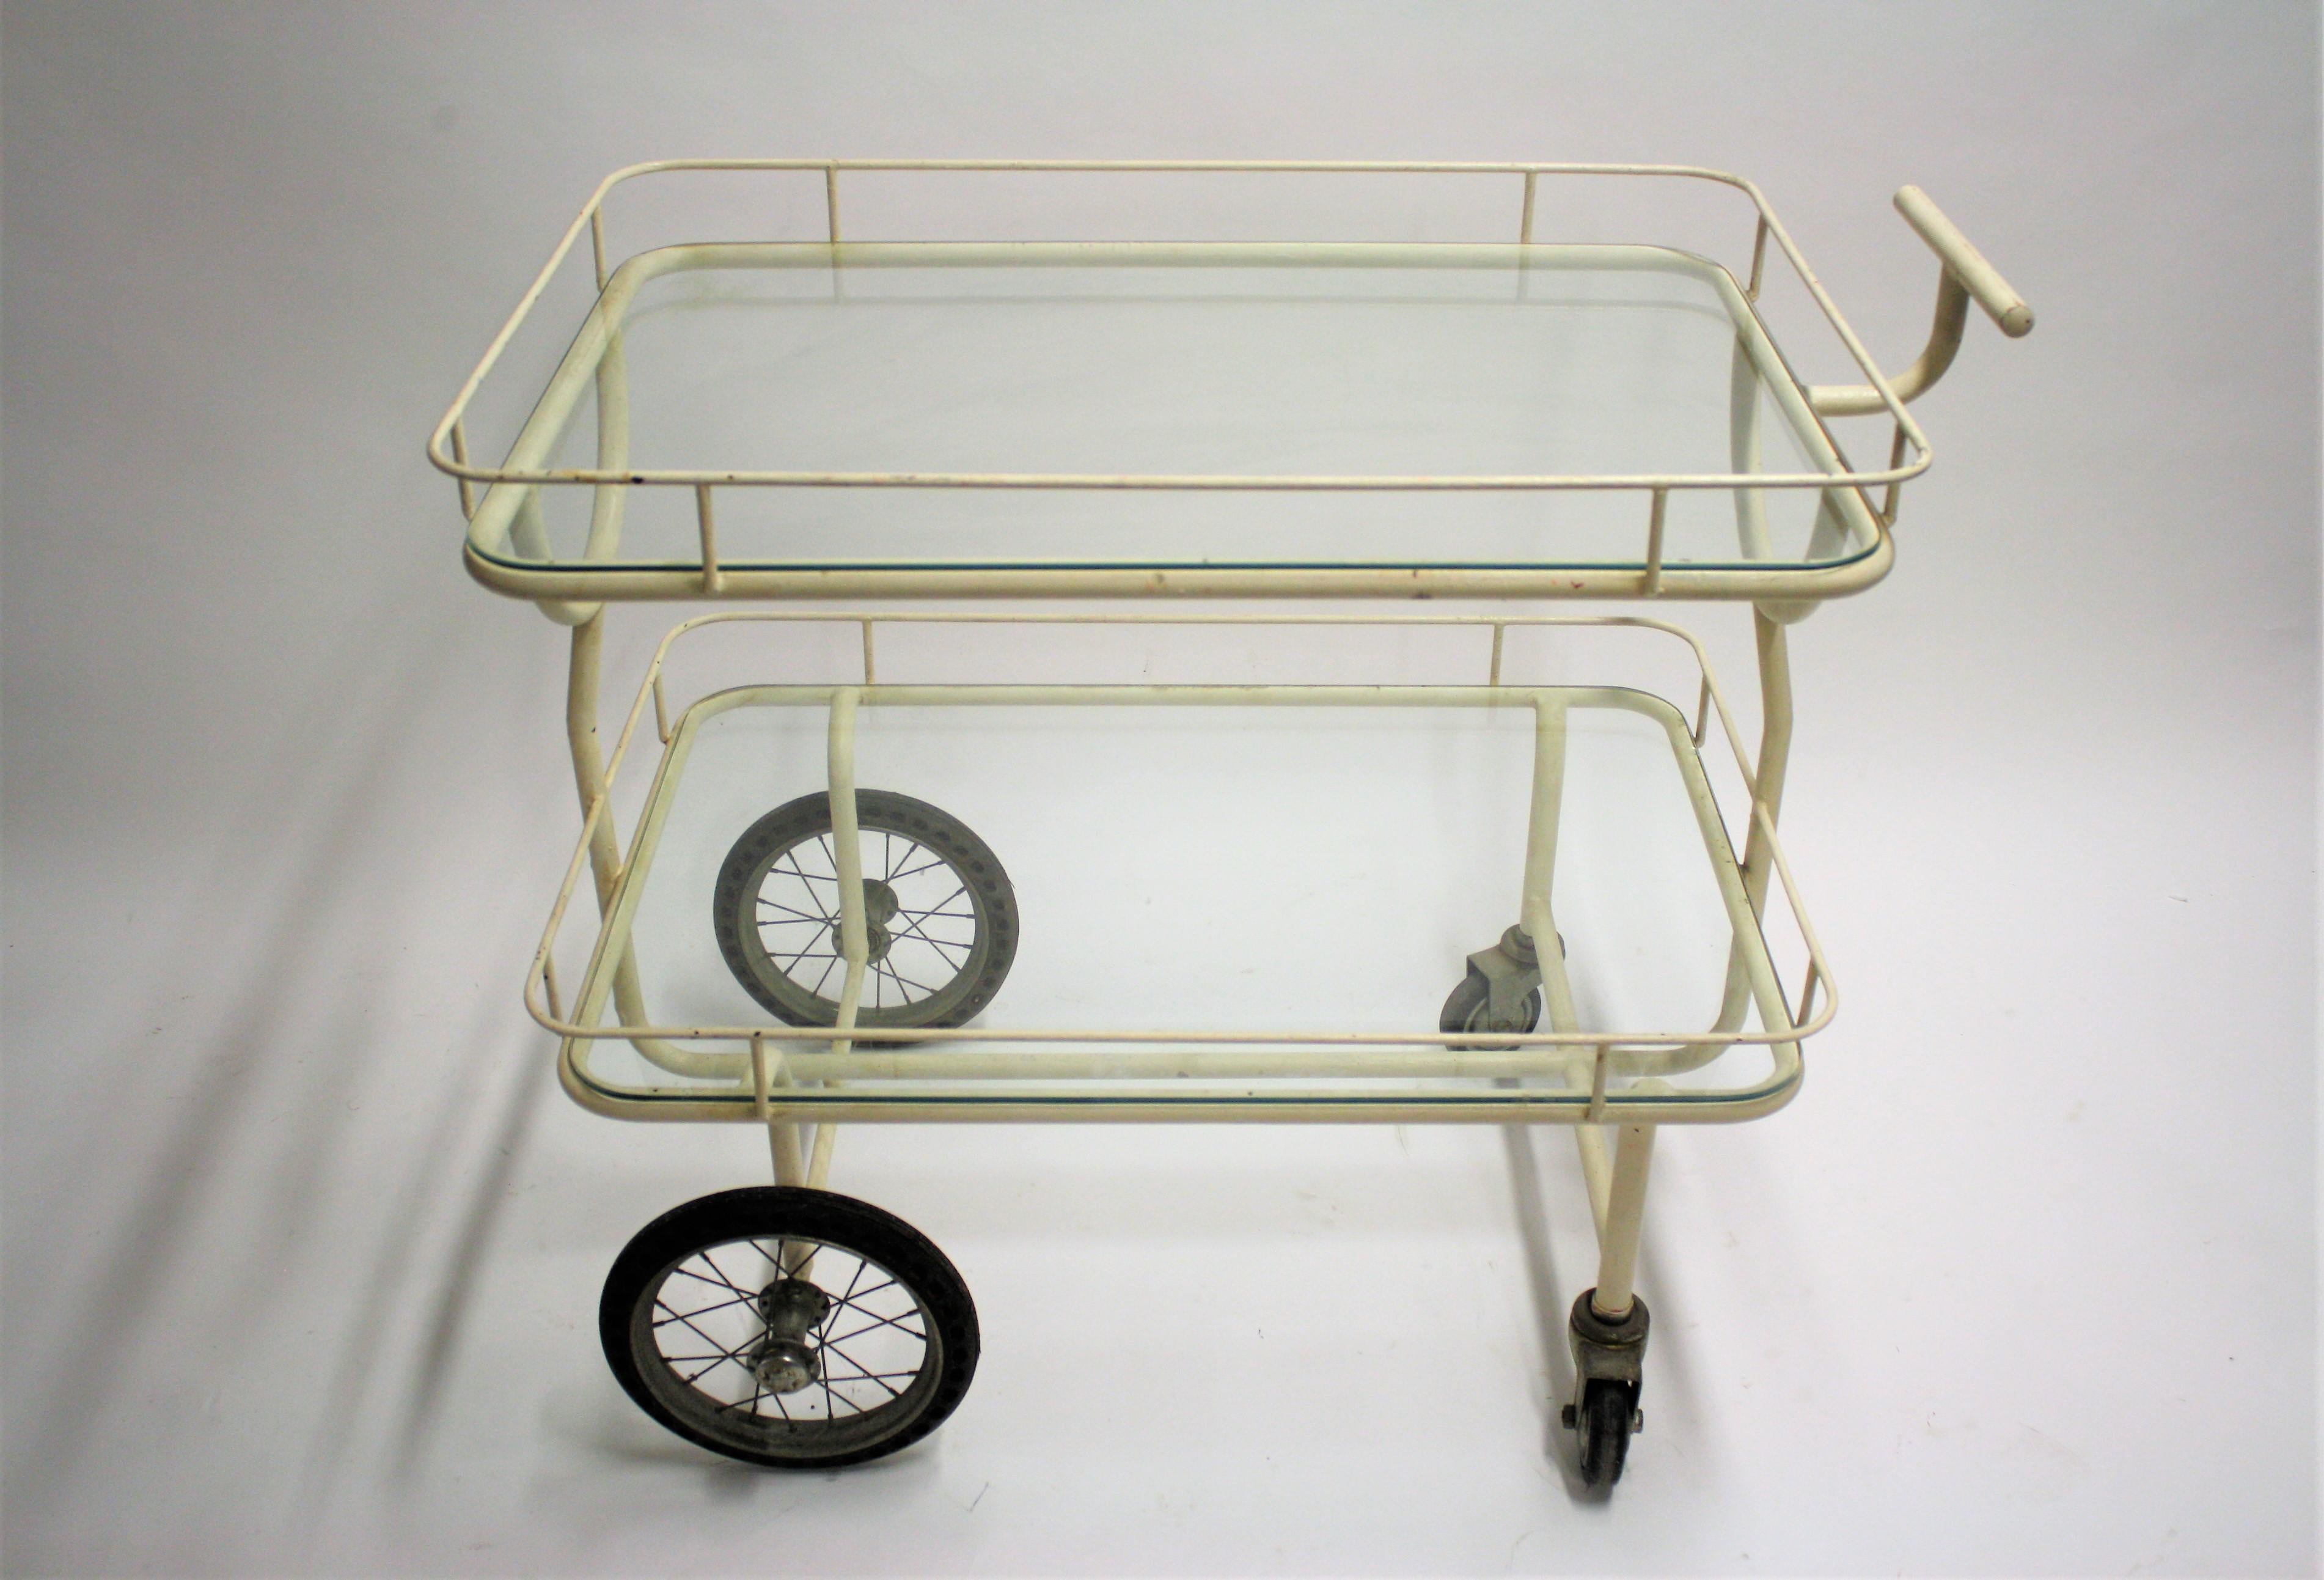 A beautiful all original French 1930s-1940s two-tier hospital trolley made from steel and glass.

It still has the original spoked wheels with tires and casters.

Wonderful patina.

The large size makes it ideal as a serving trolley but it